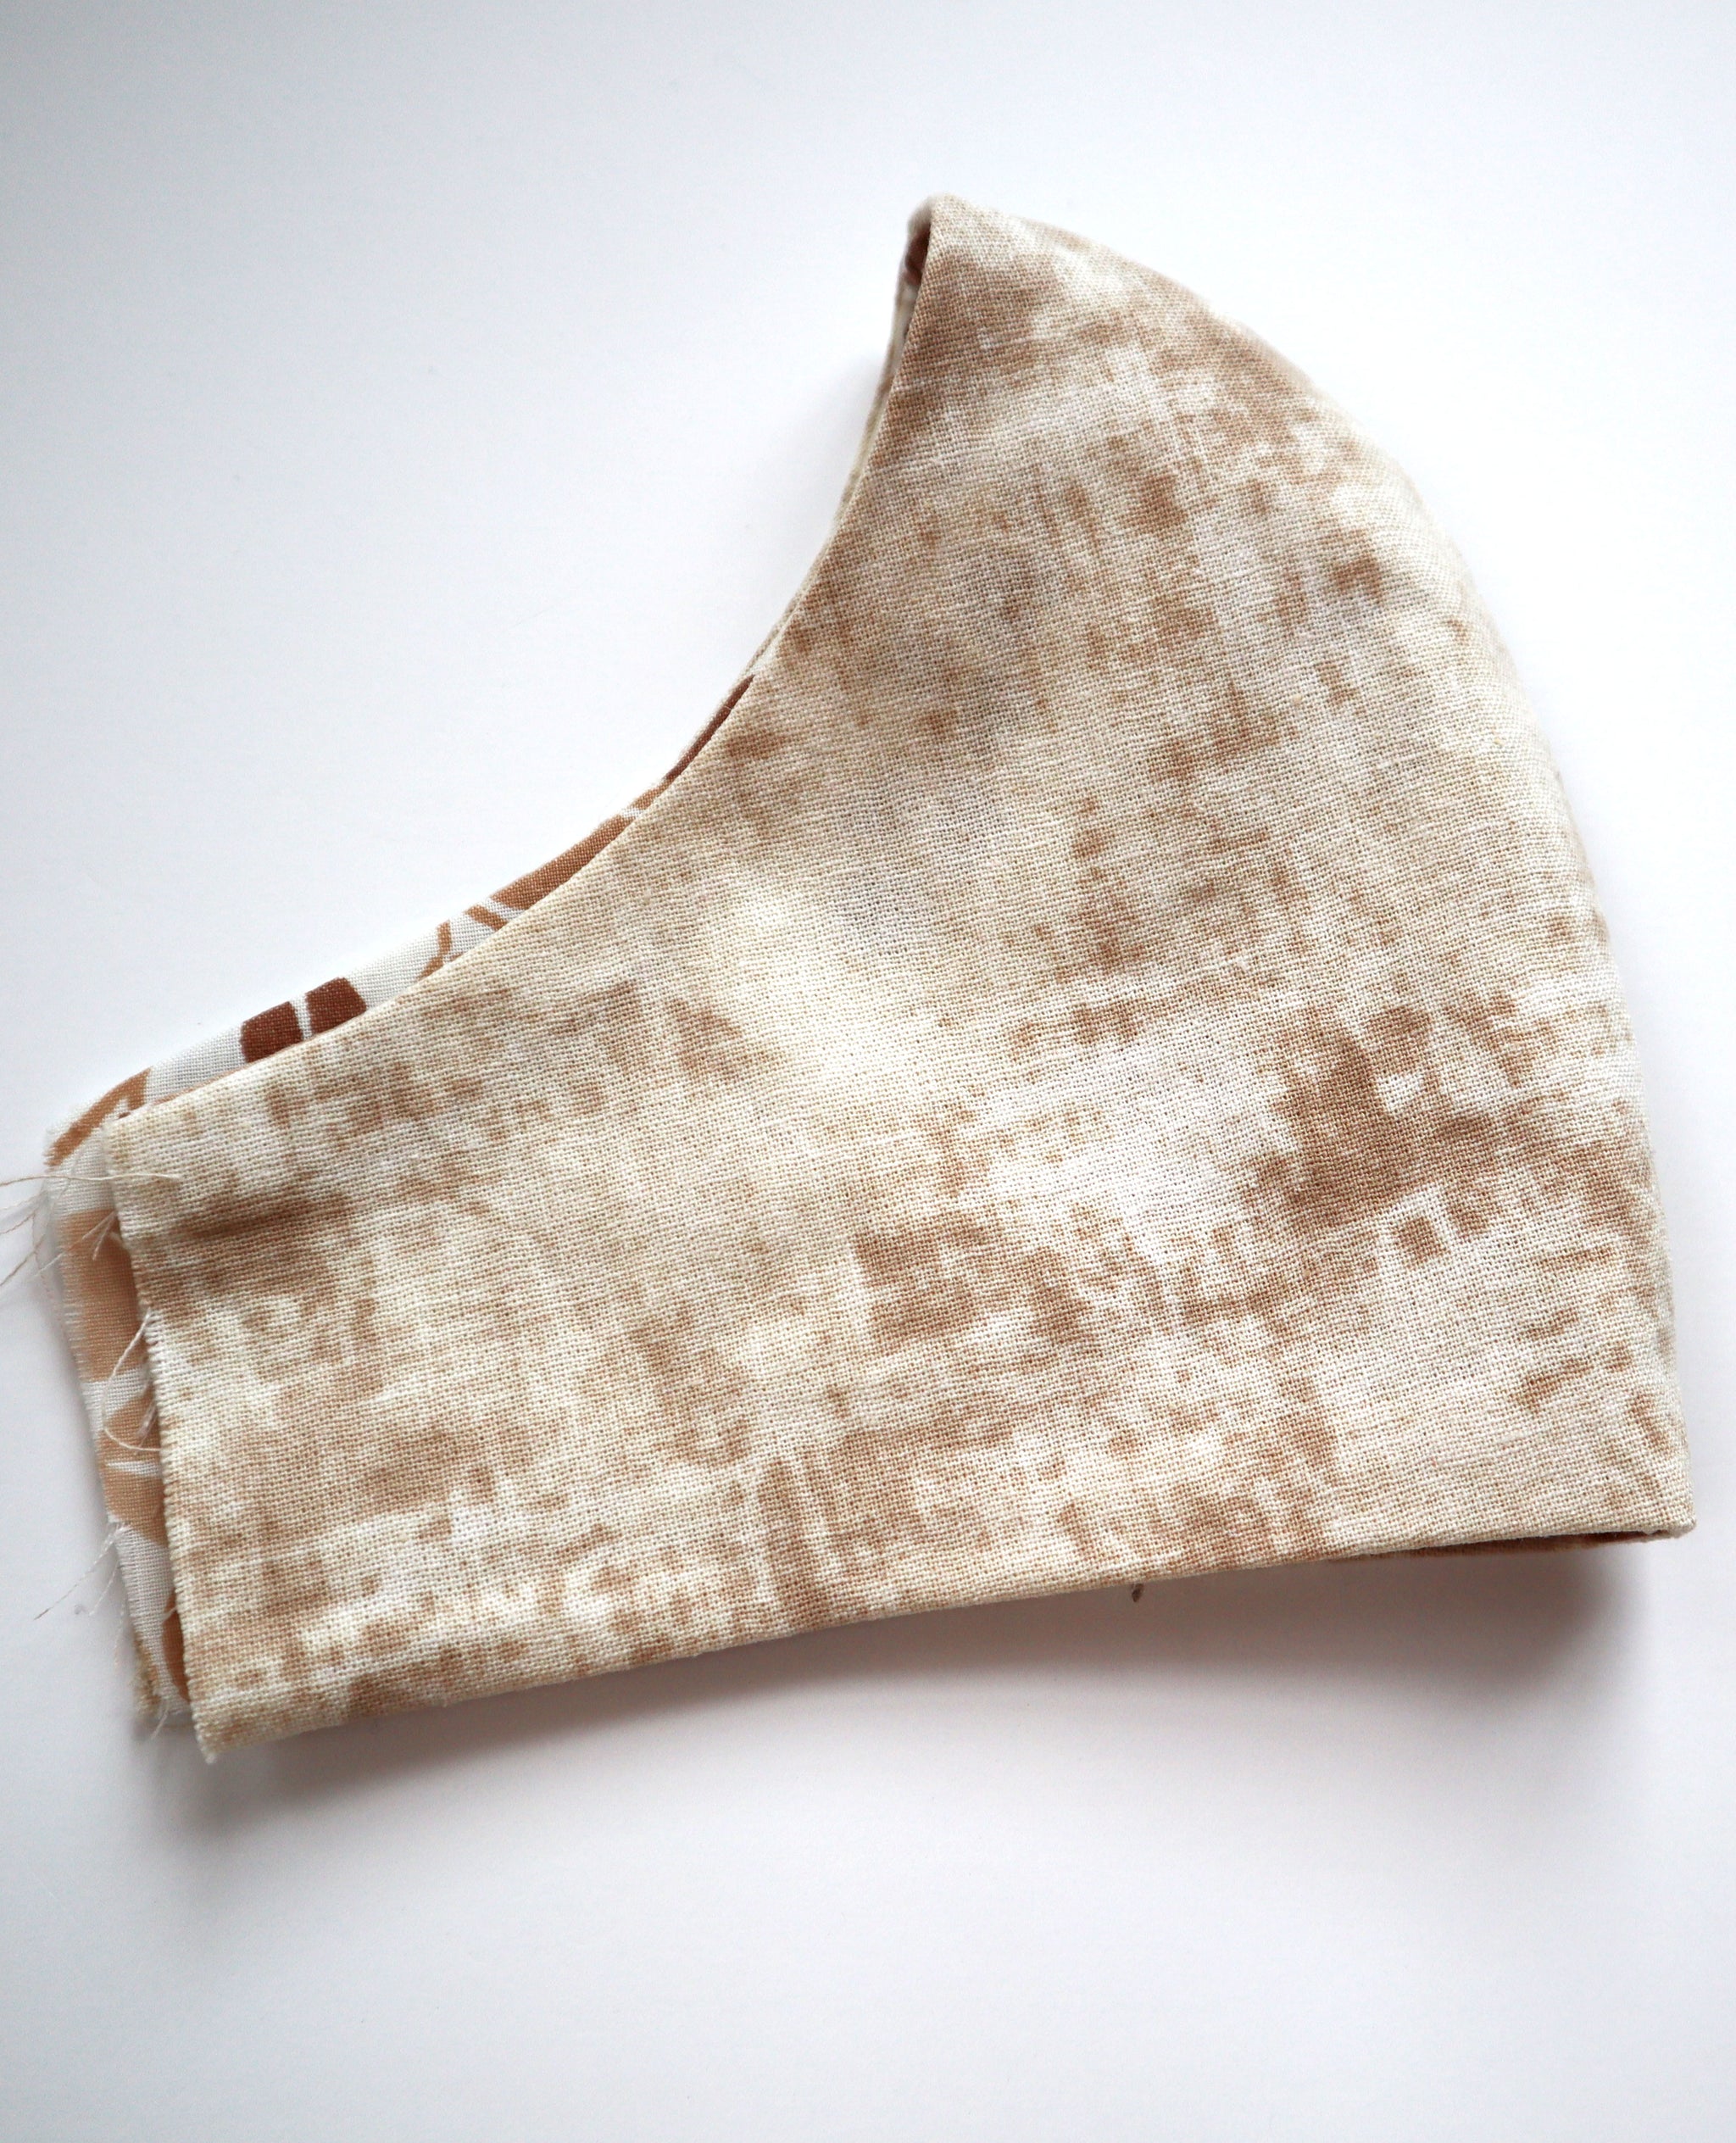 Reversible Natural Leaves 70s Bedding Fabric Mask